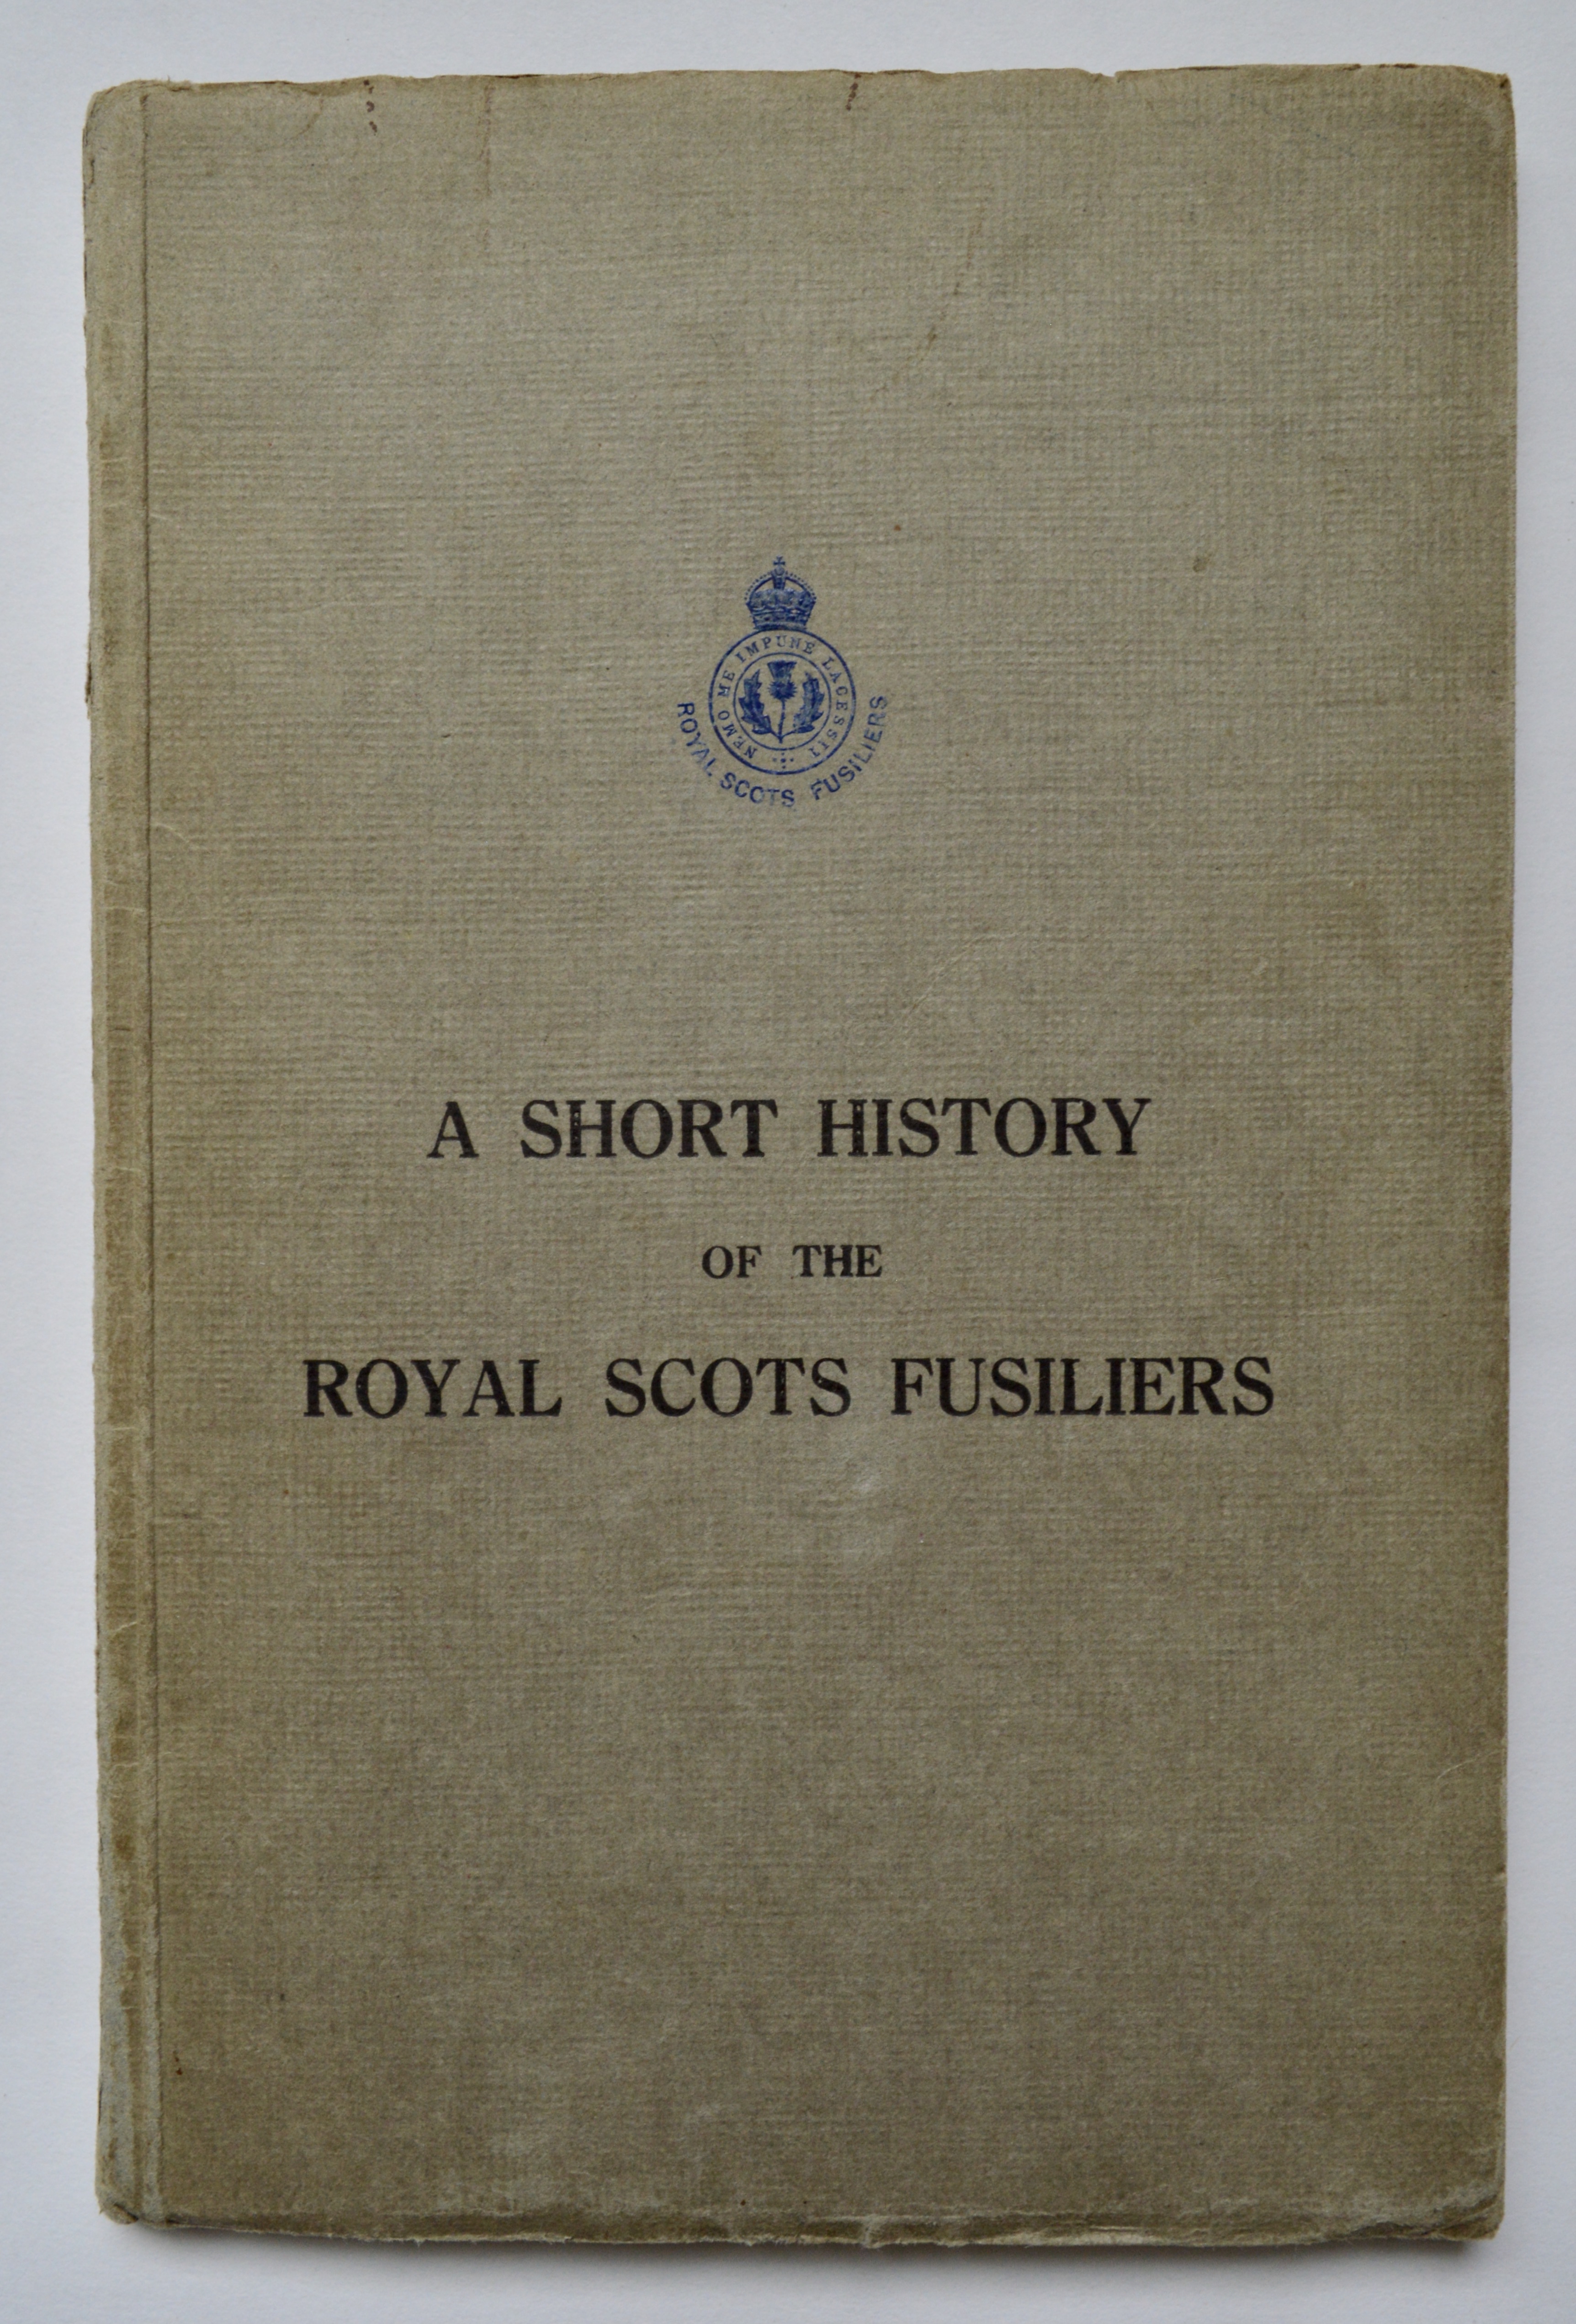 A Short History of the Royal Scots Fusiliers - Books - PBFA